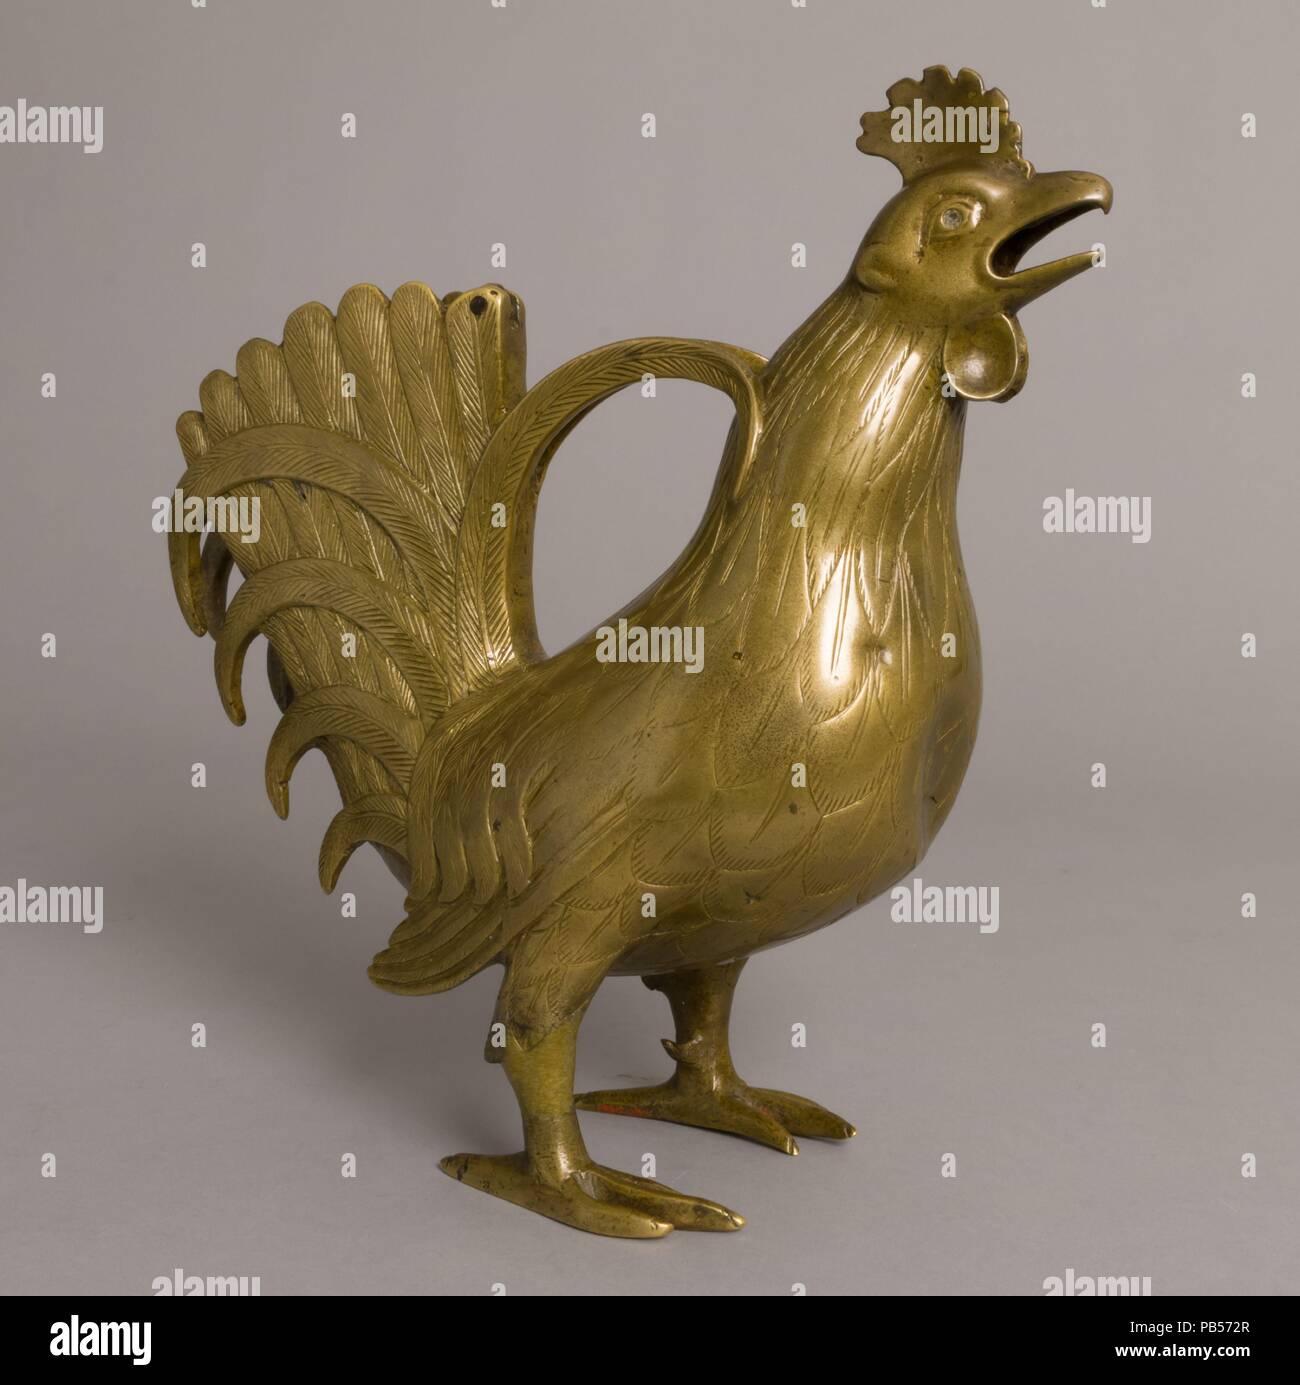 Aquamanile in the Form of a Rooster. Culture: German. Dimensions: 9 15/16 x 4 1/8 x 9 3/4 in. (25.2 x 10.5 x 24.7 cm)  Thickness: 11/16-15/16 in. (0.18-0.24 cm). Date: 13th century.  The rooster's majestic tail feathers splay in rhythmic arcs as he crows, full-throated. The artist who modeled the bird boldly balanced the body on its tiny talons.  This elaborate water vessel was intended for handwashing. A specialty of metalworkers in German-speaking lands for centuries--from the twelfth to the fifteenth--they are called aquamanilia, from the Latin words for water (aqua) and hand (manus). Museu Stock Photo